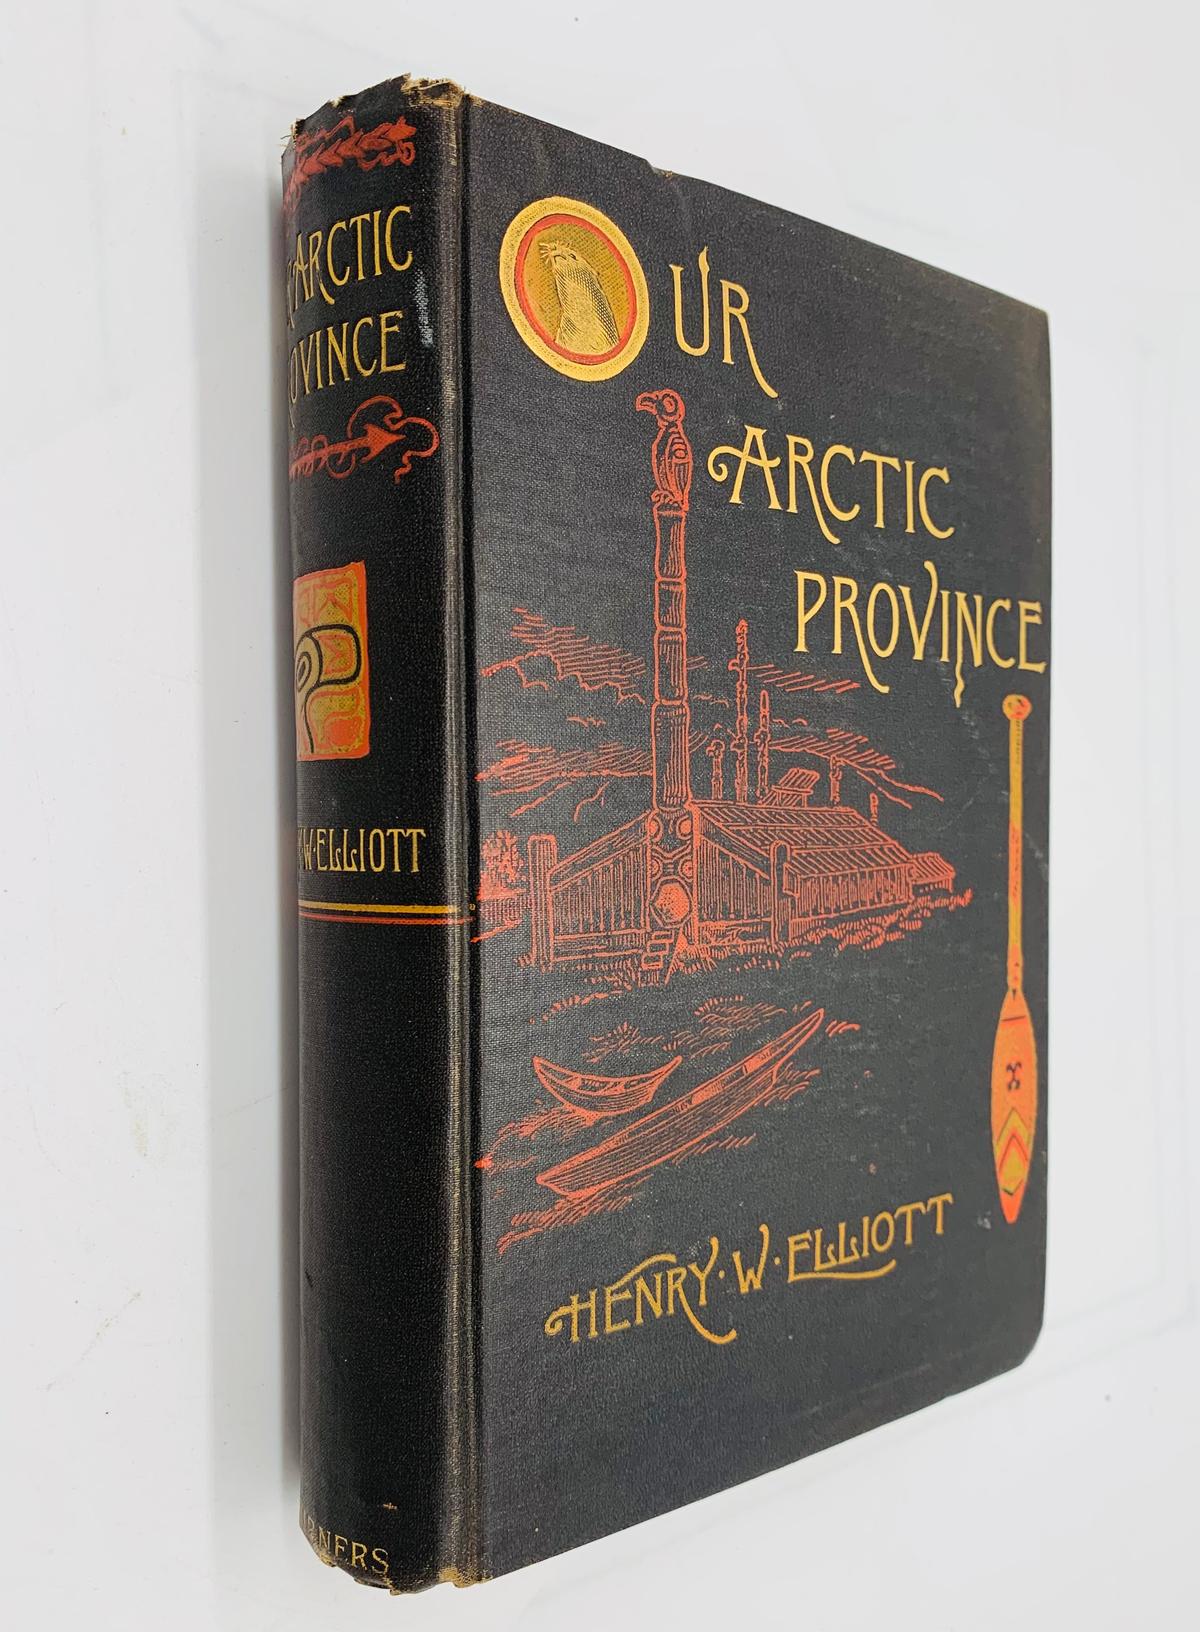 RARE Our Arctic Province Alaska And The Seal Islands by Henry W. Elliot (1886)